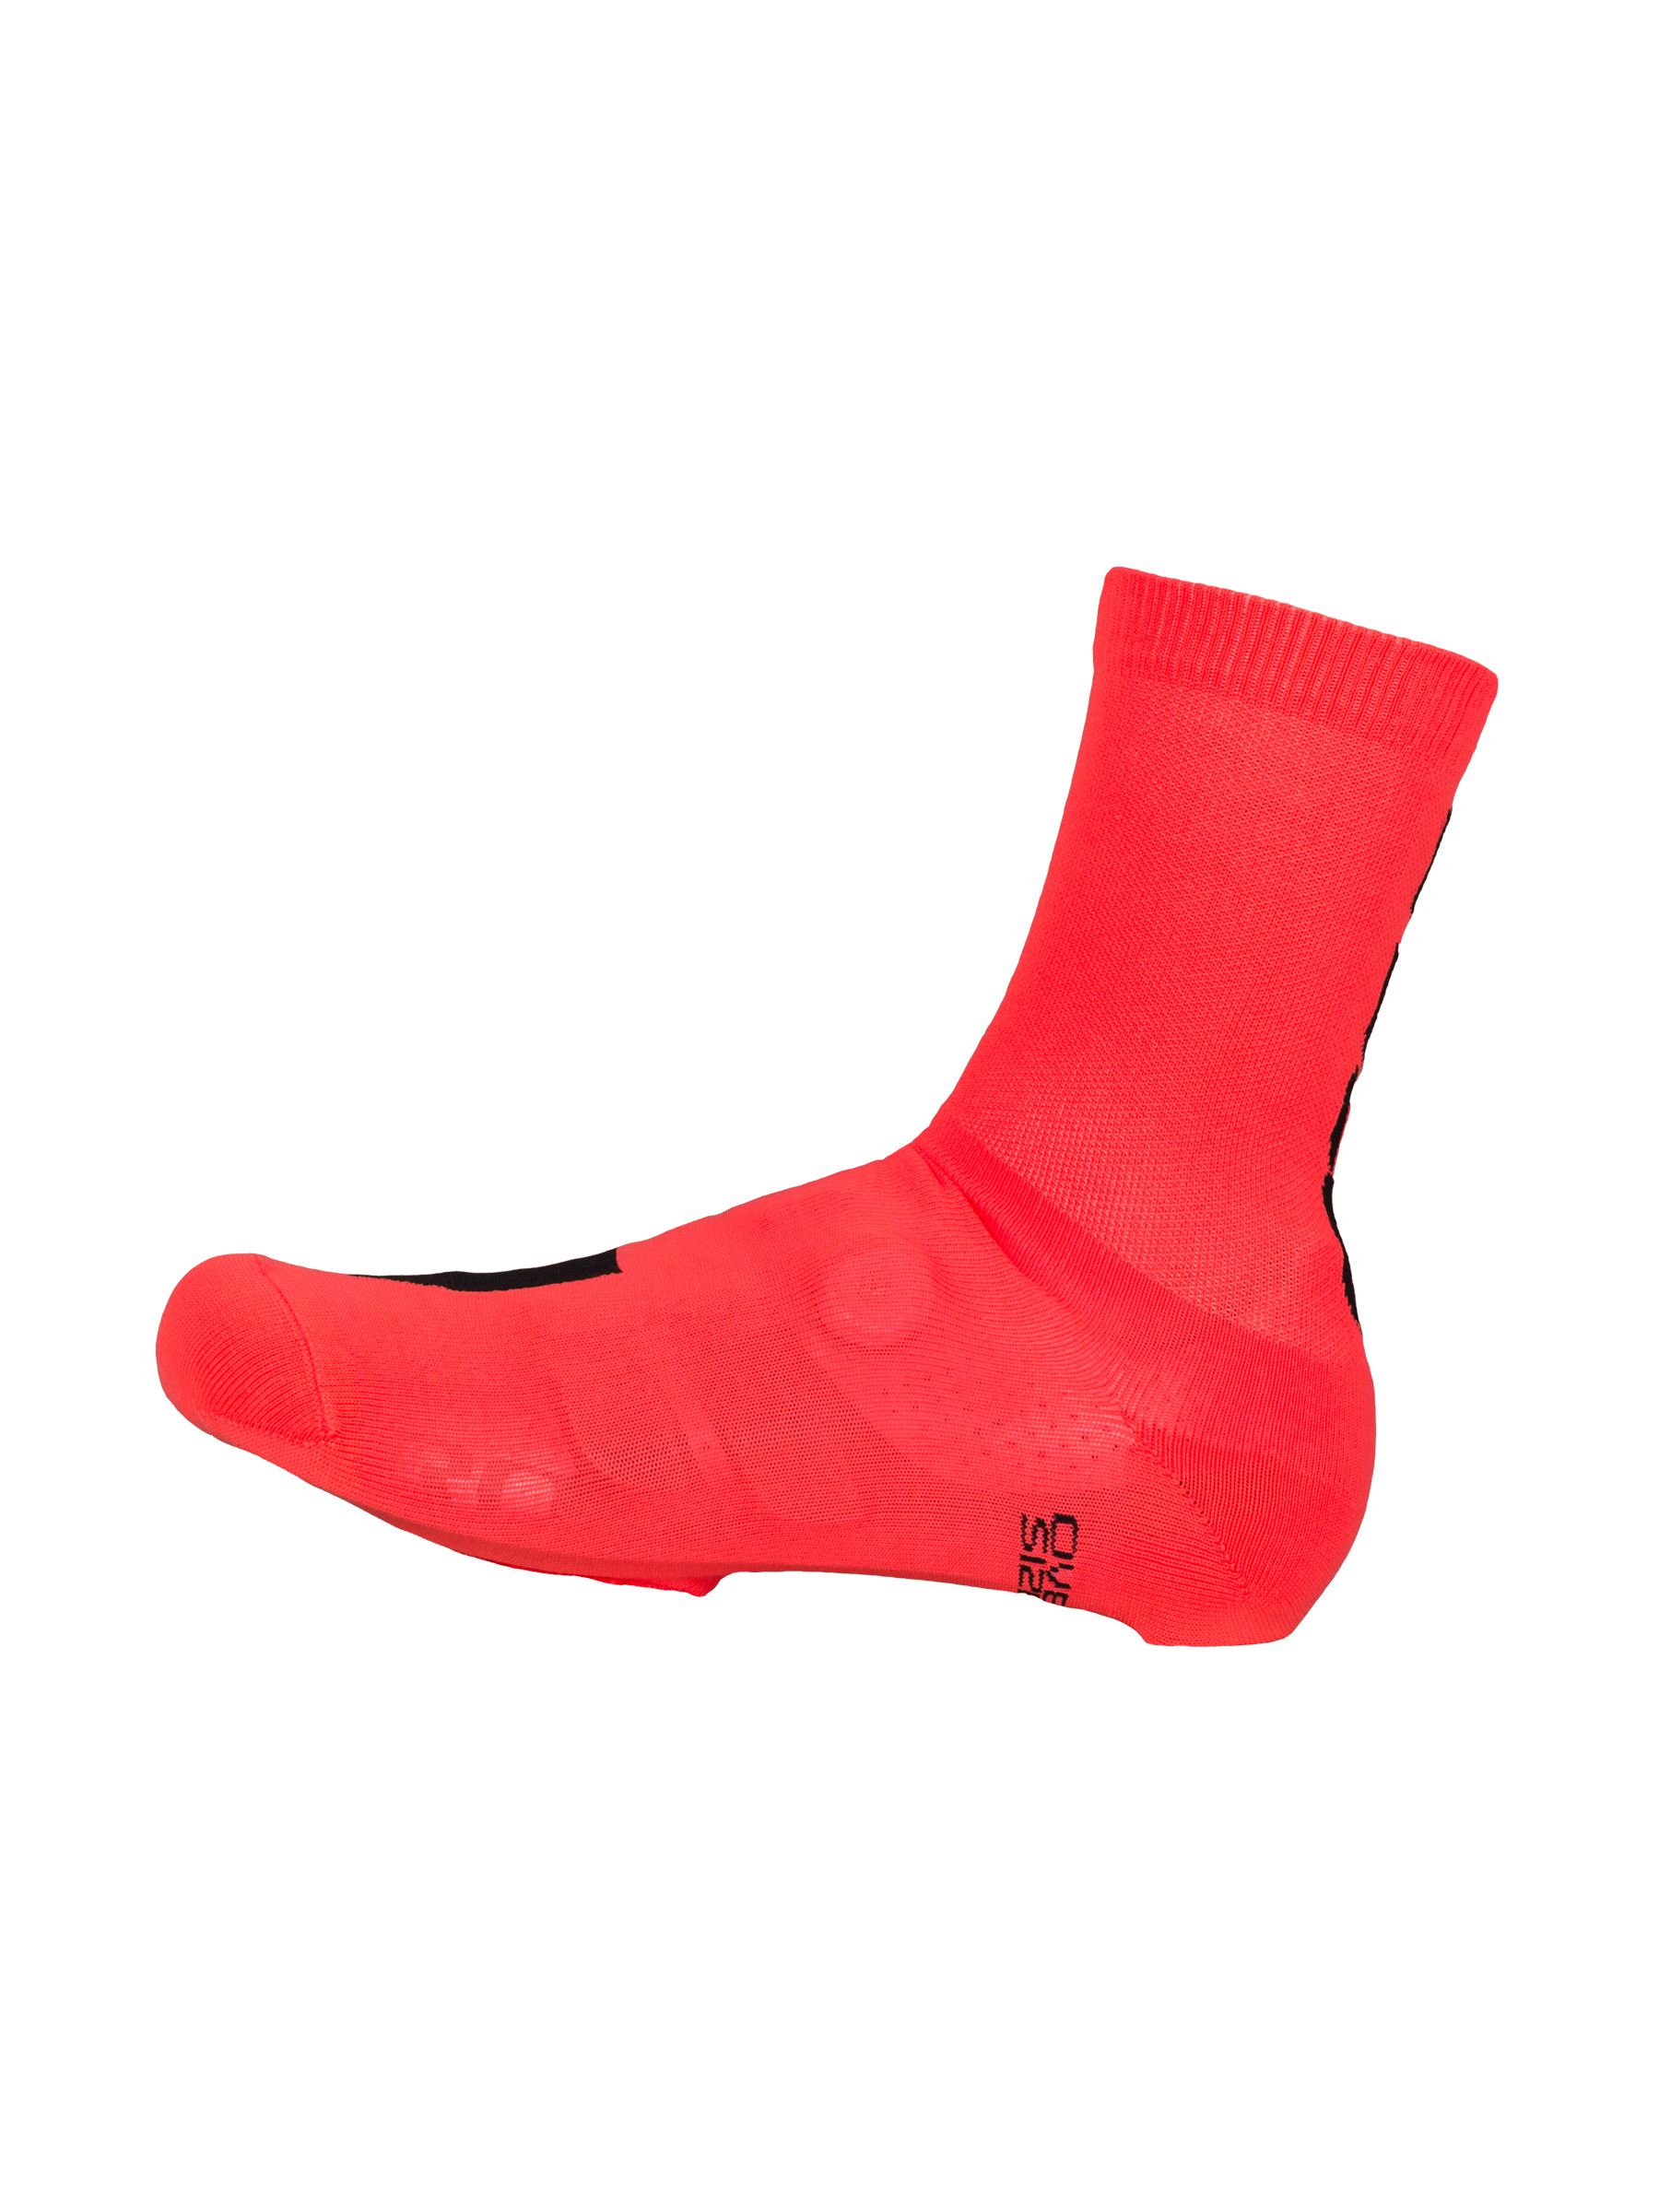 Stories / How do you put on an overshoe?